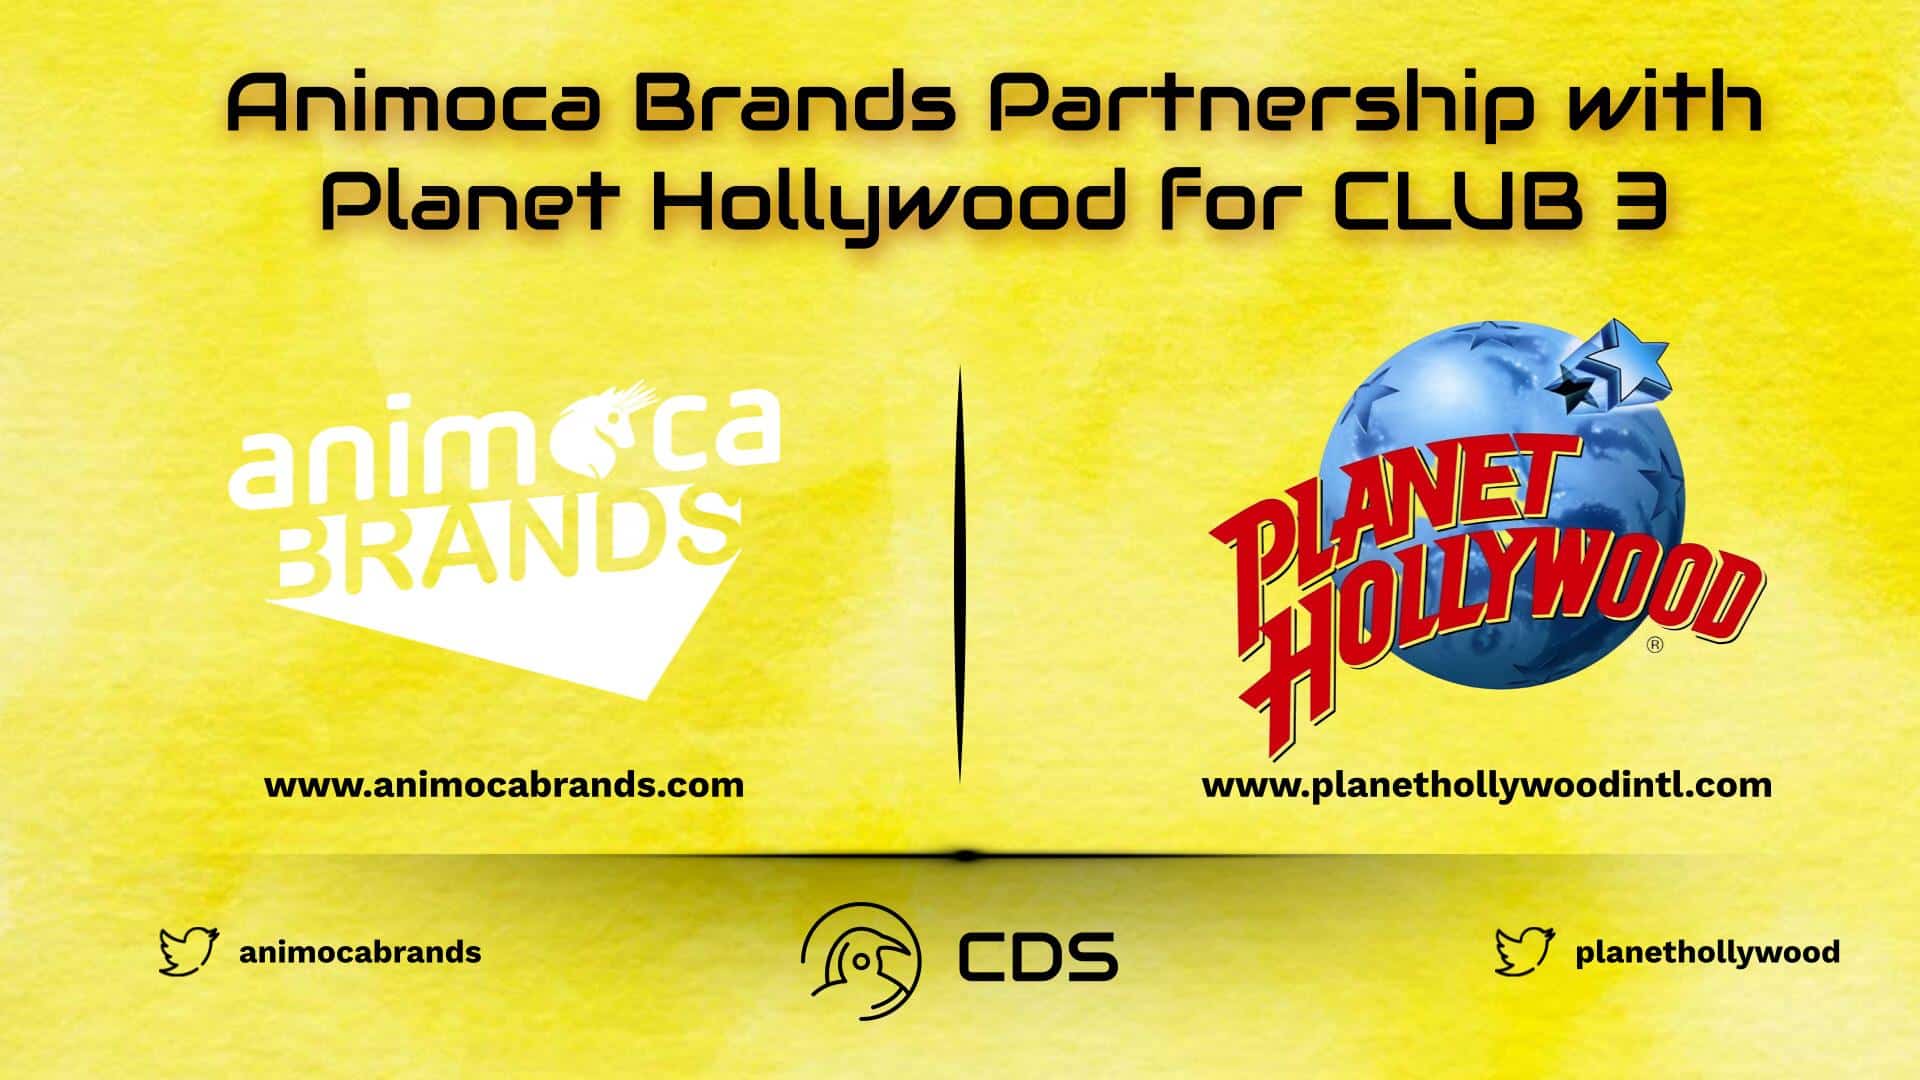 Animoca Brands Partnership with Planet Hollywood for CLUB 3